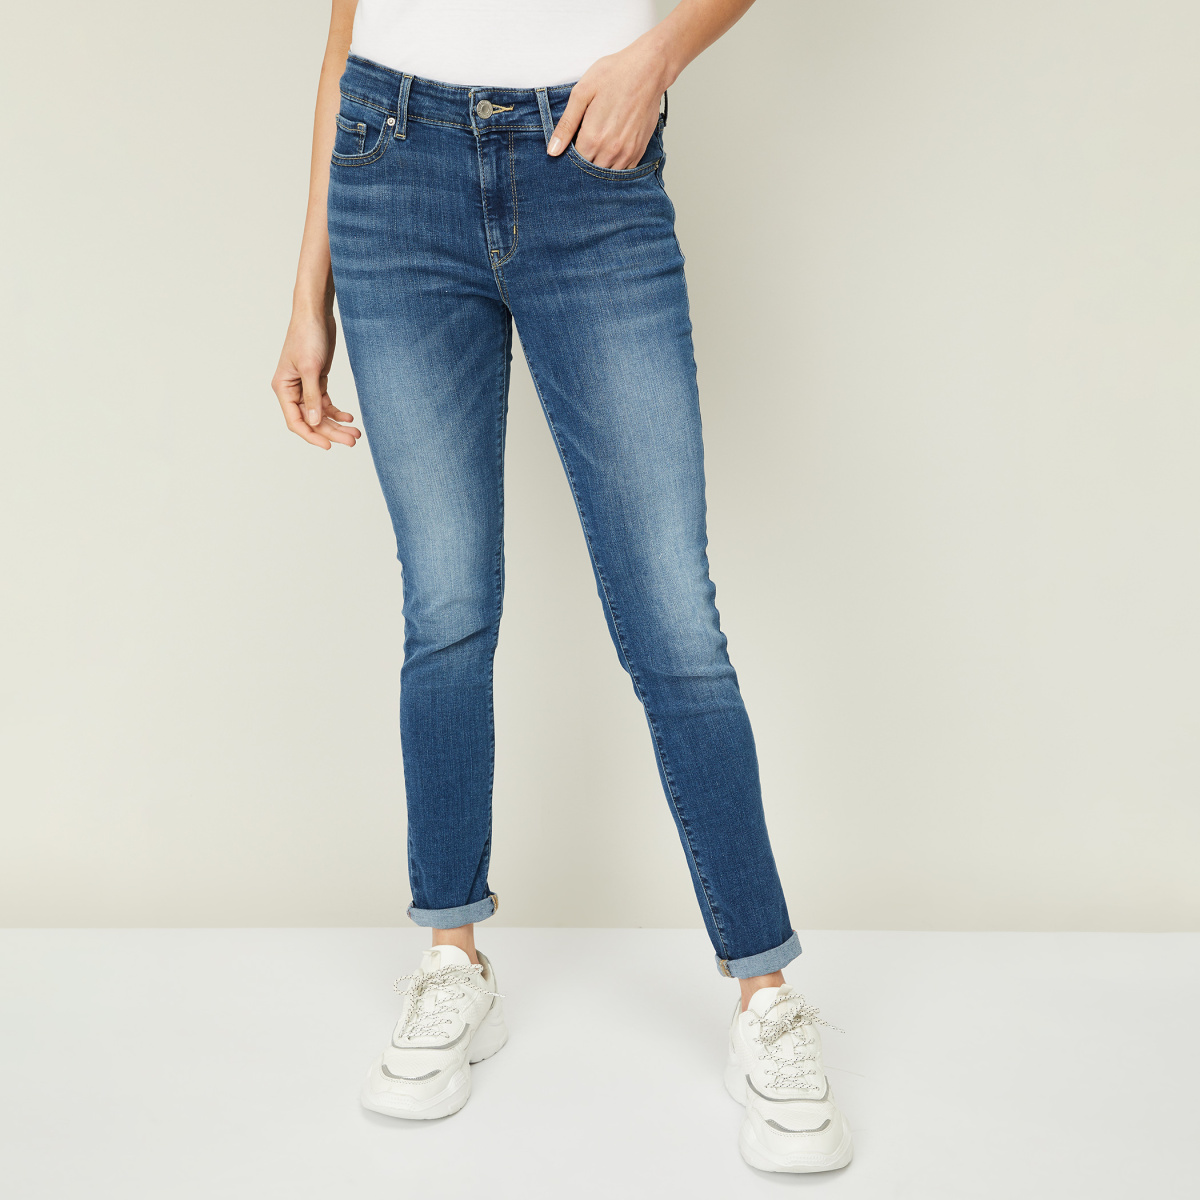 LEVI'S Women Stonewashed Skinny Fit Jeans